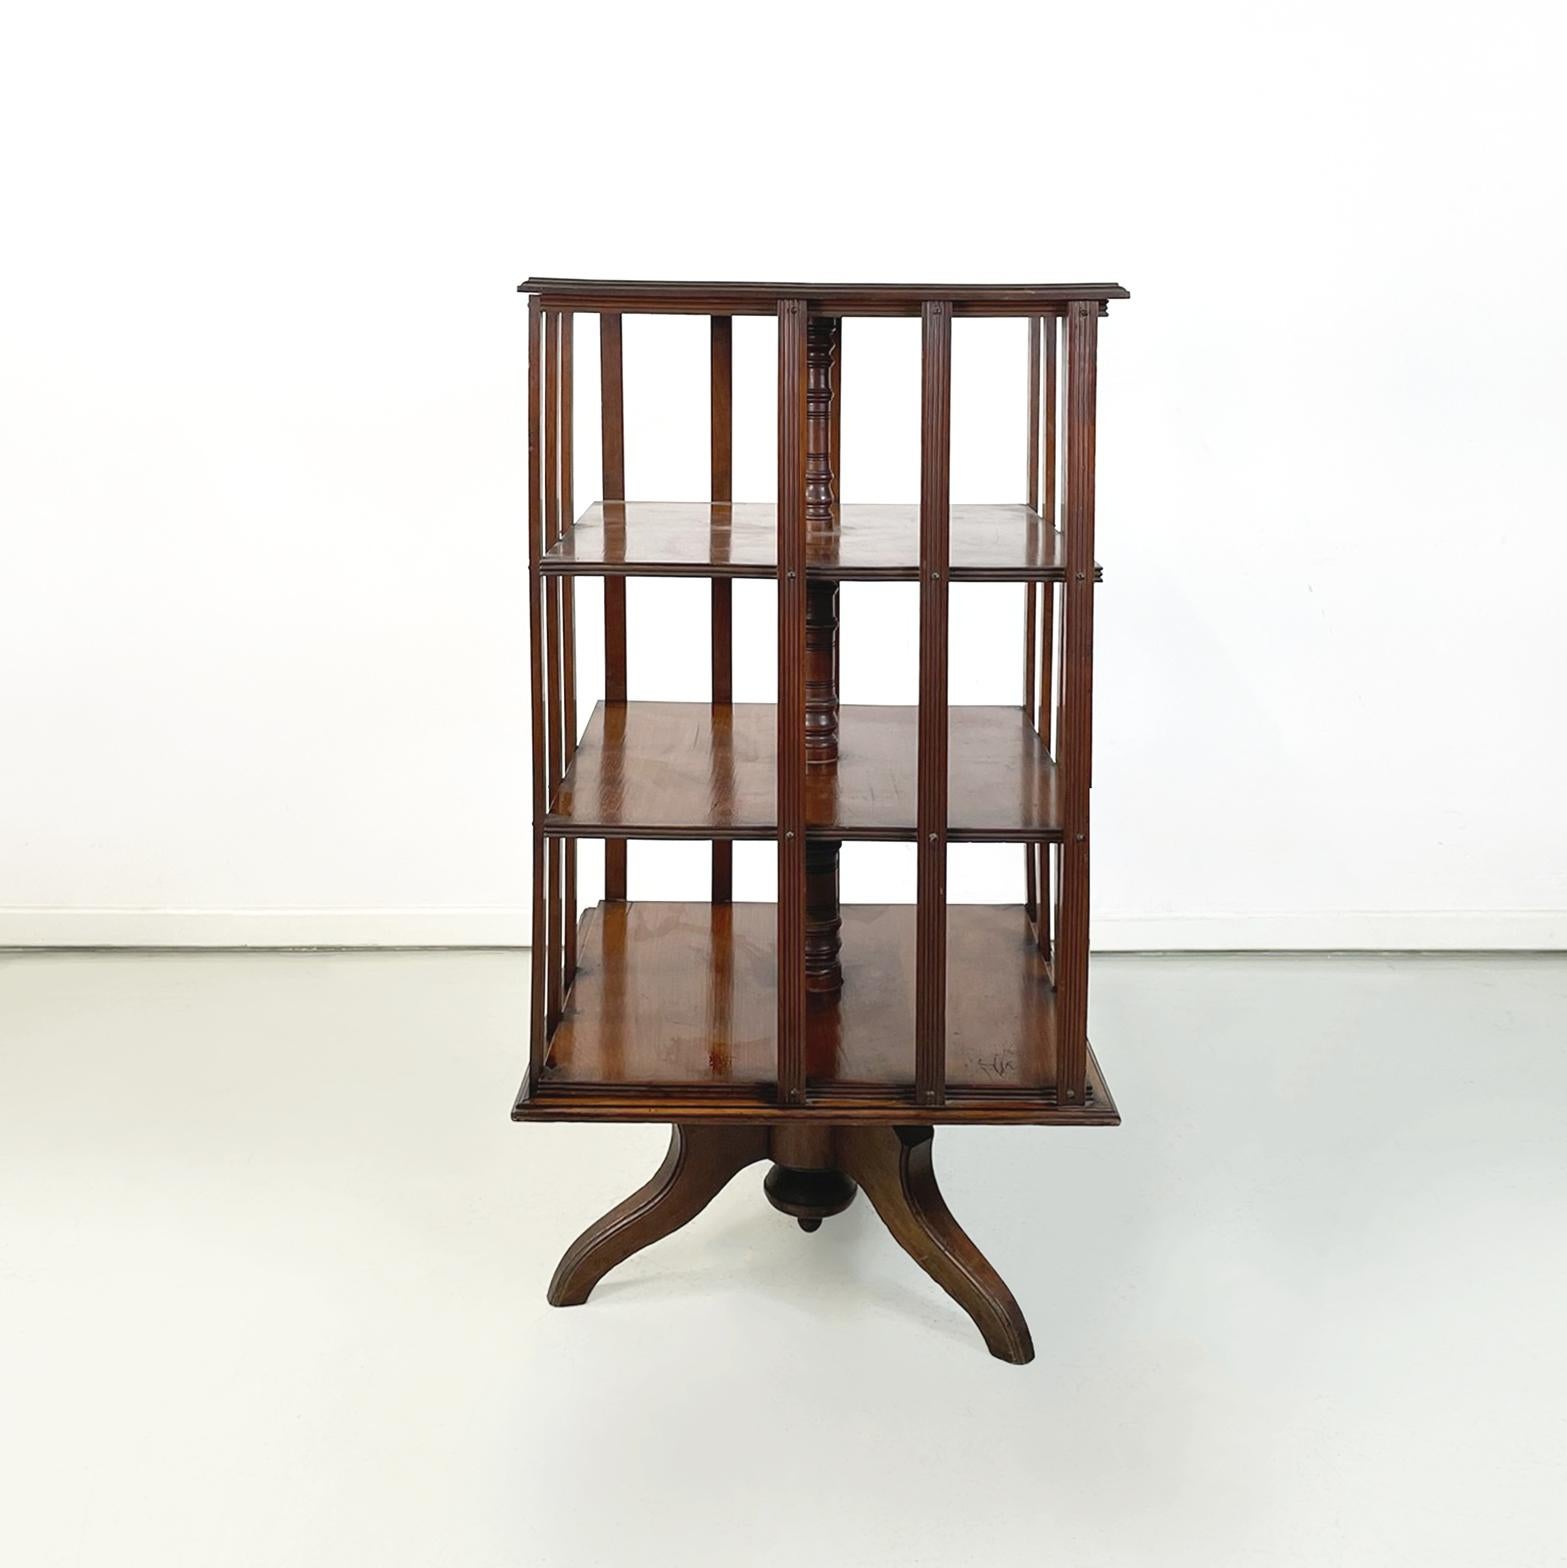 English antique Revolving bookcase in solid wood, 1920s
Elegant and vintage revolving bookcase with square base, entirely in solid wood. The turned central structure is the pivot of the bookcase. The 3 shelves are joined by a series of wooden strips